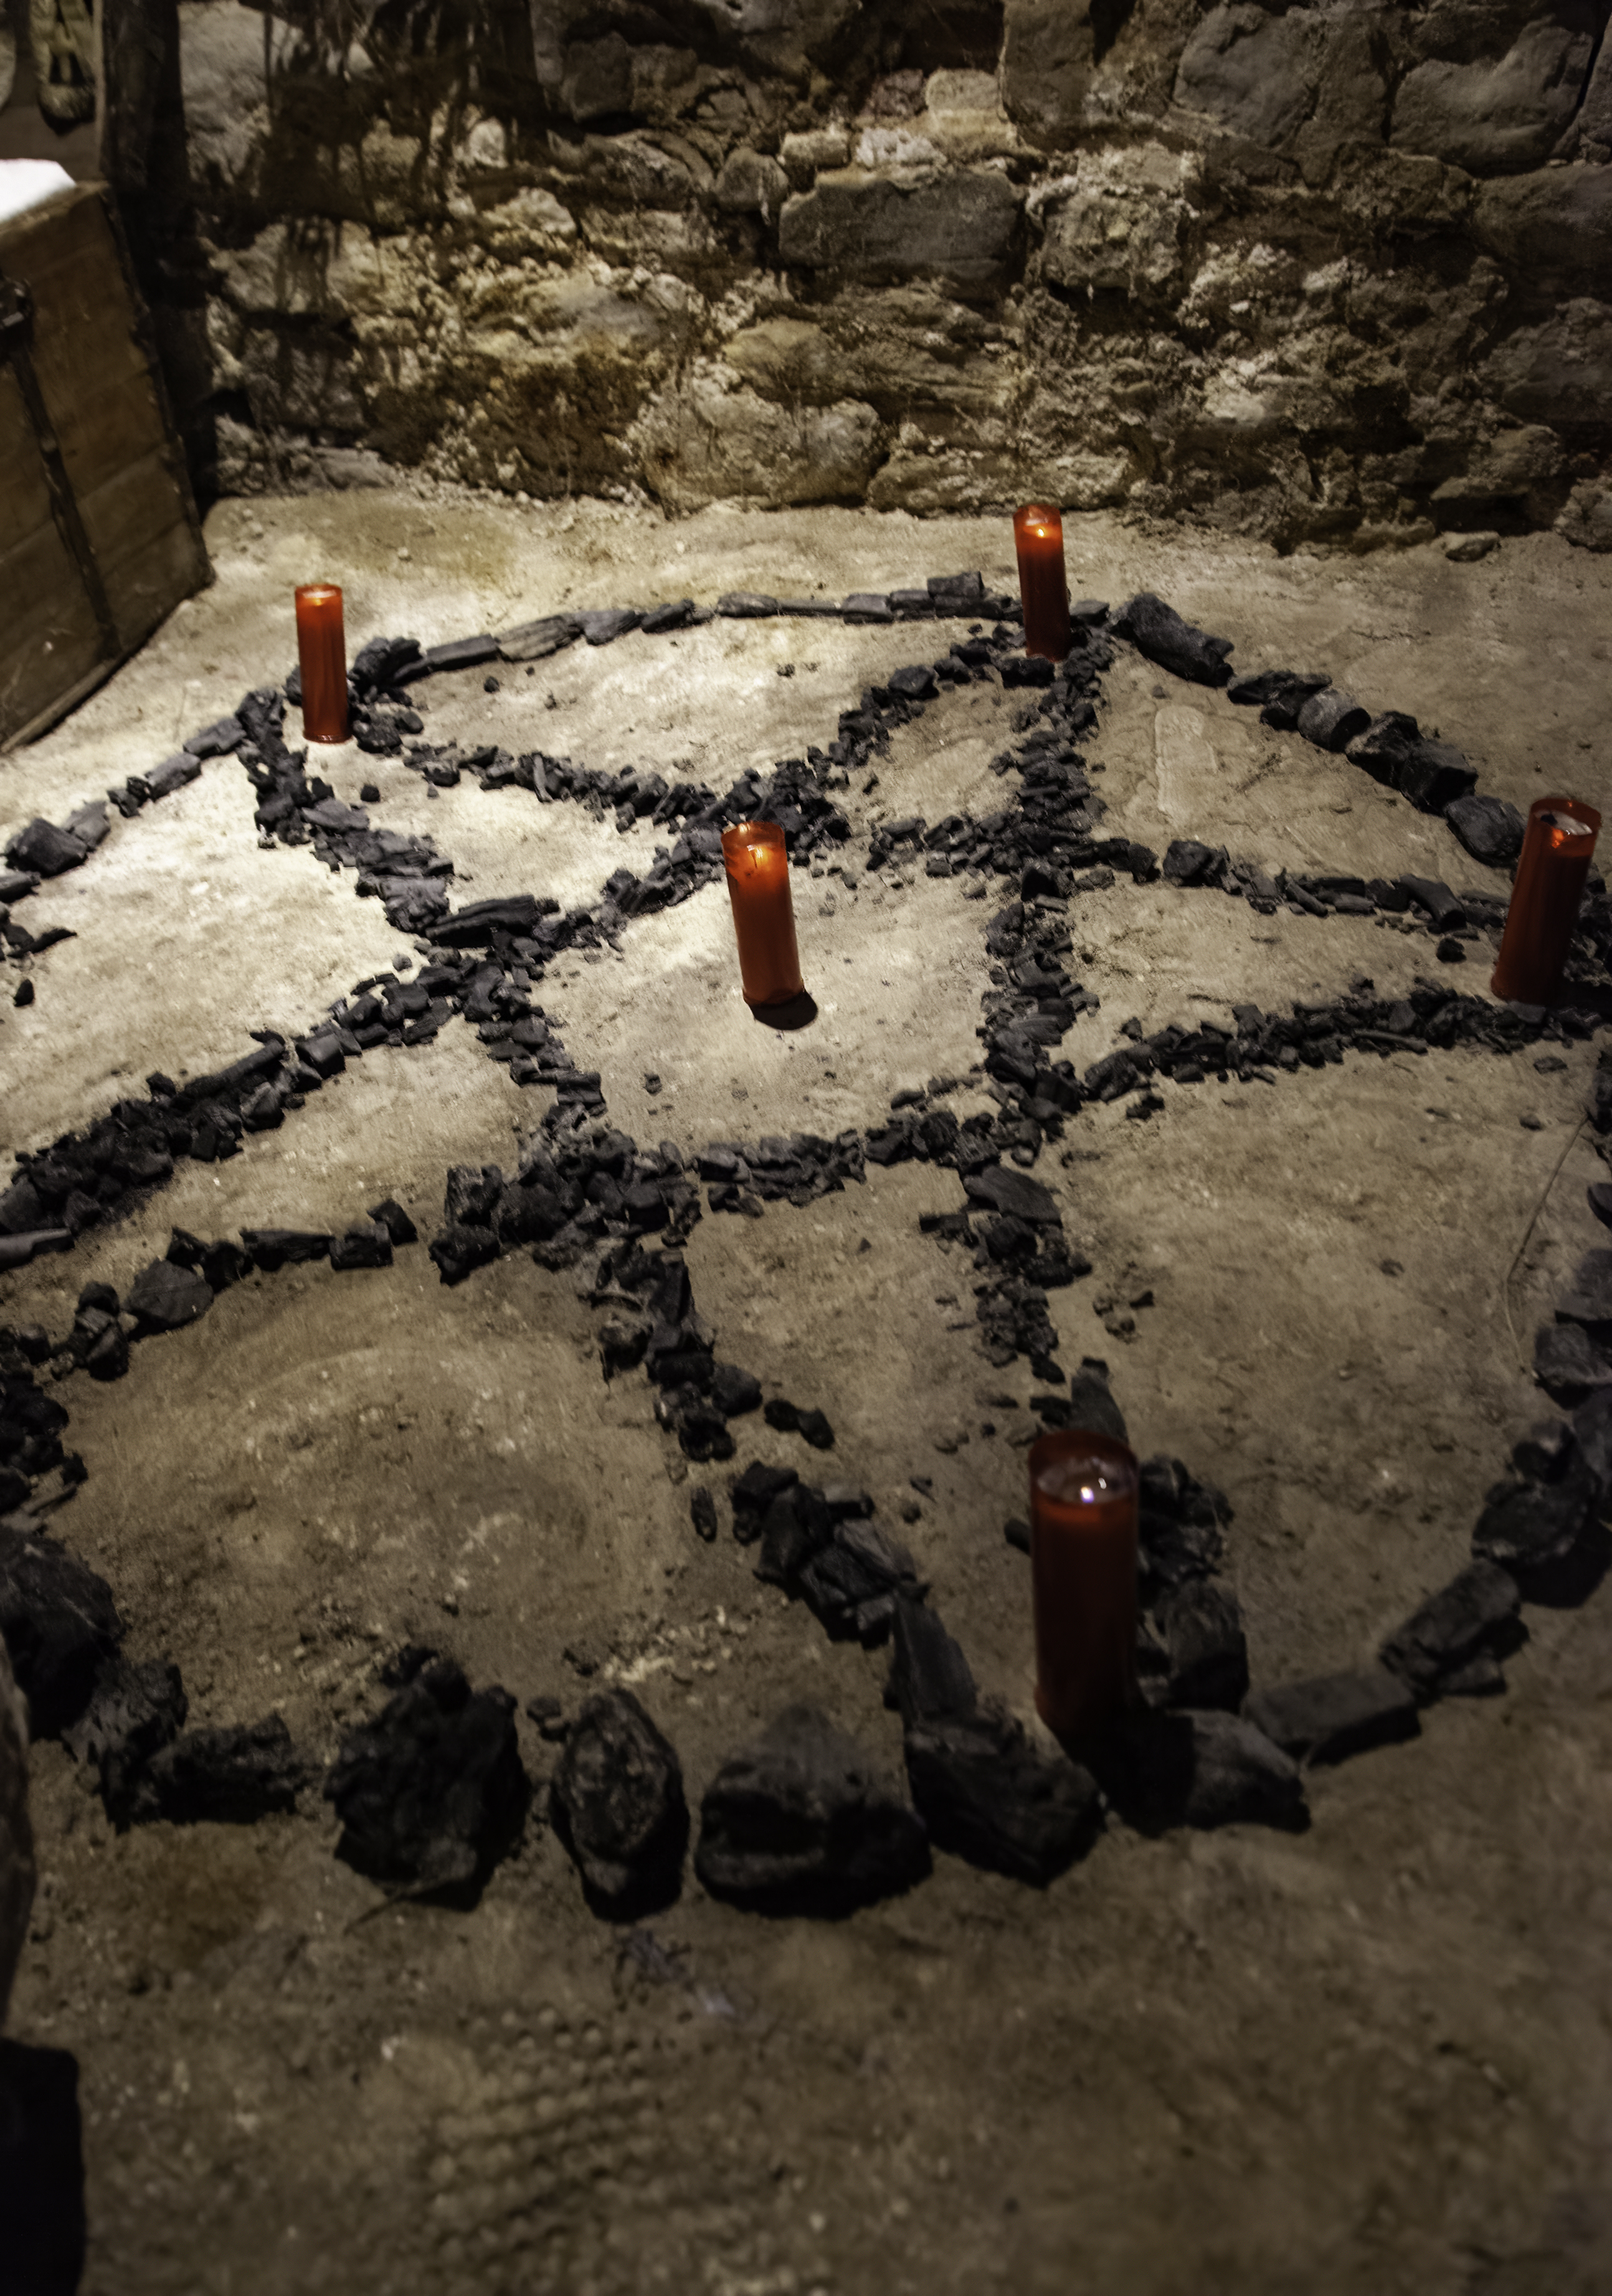 Pentagram shape made of stones on the ground with candles at each point in a dimly lit setting